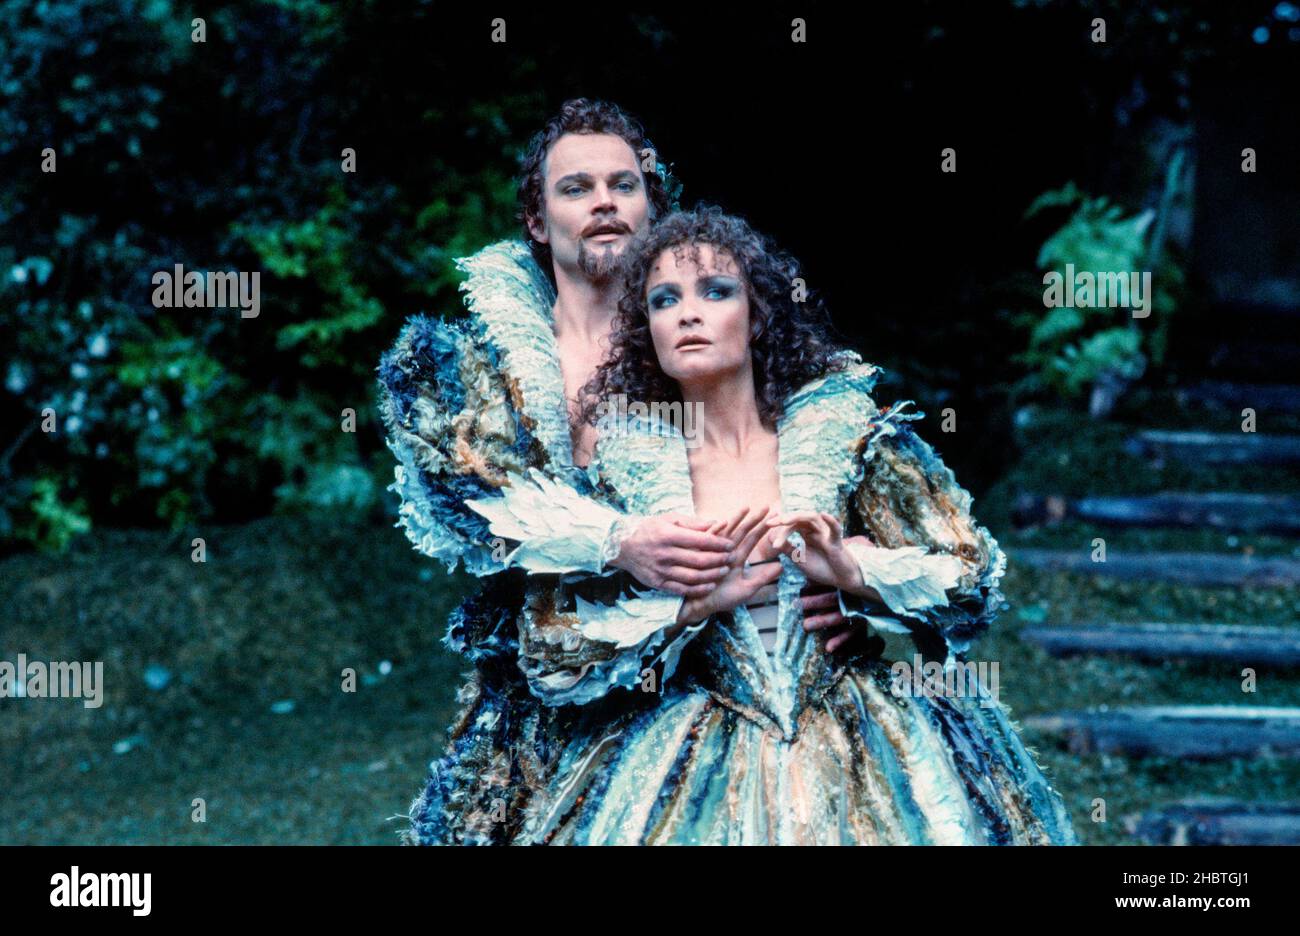 Christopher Neame (Oberon), Kate O’Mara (Titania) in A MIDSUMMER NIGHT'S DREAM by Shakespeare at the Open Air Theatre, Regent’s Park, London NW1  21/06/1982  design: Tim Goodchild  director: David Conville Stock Photo